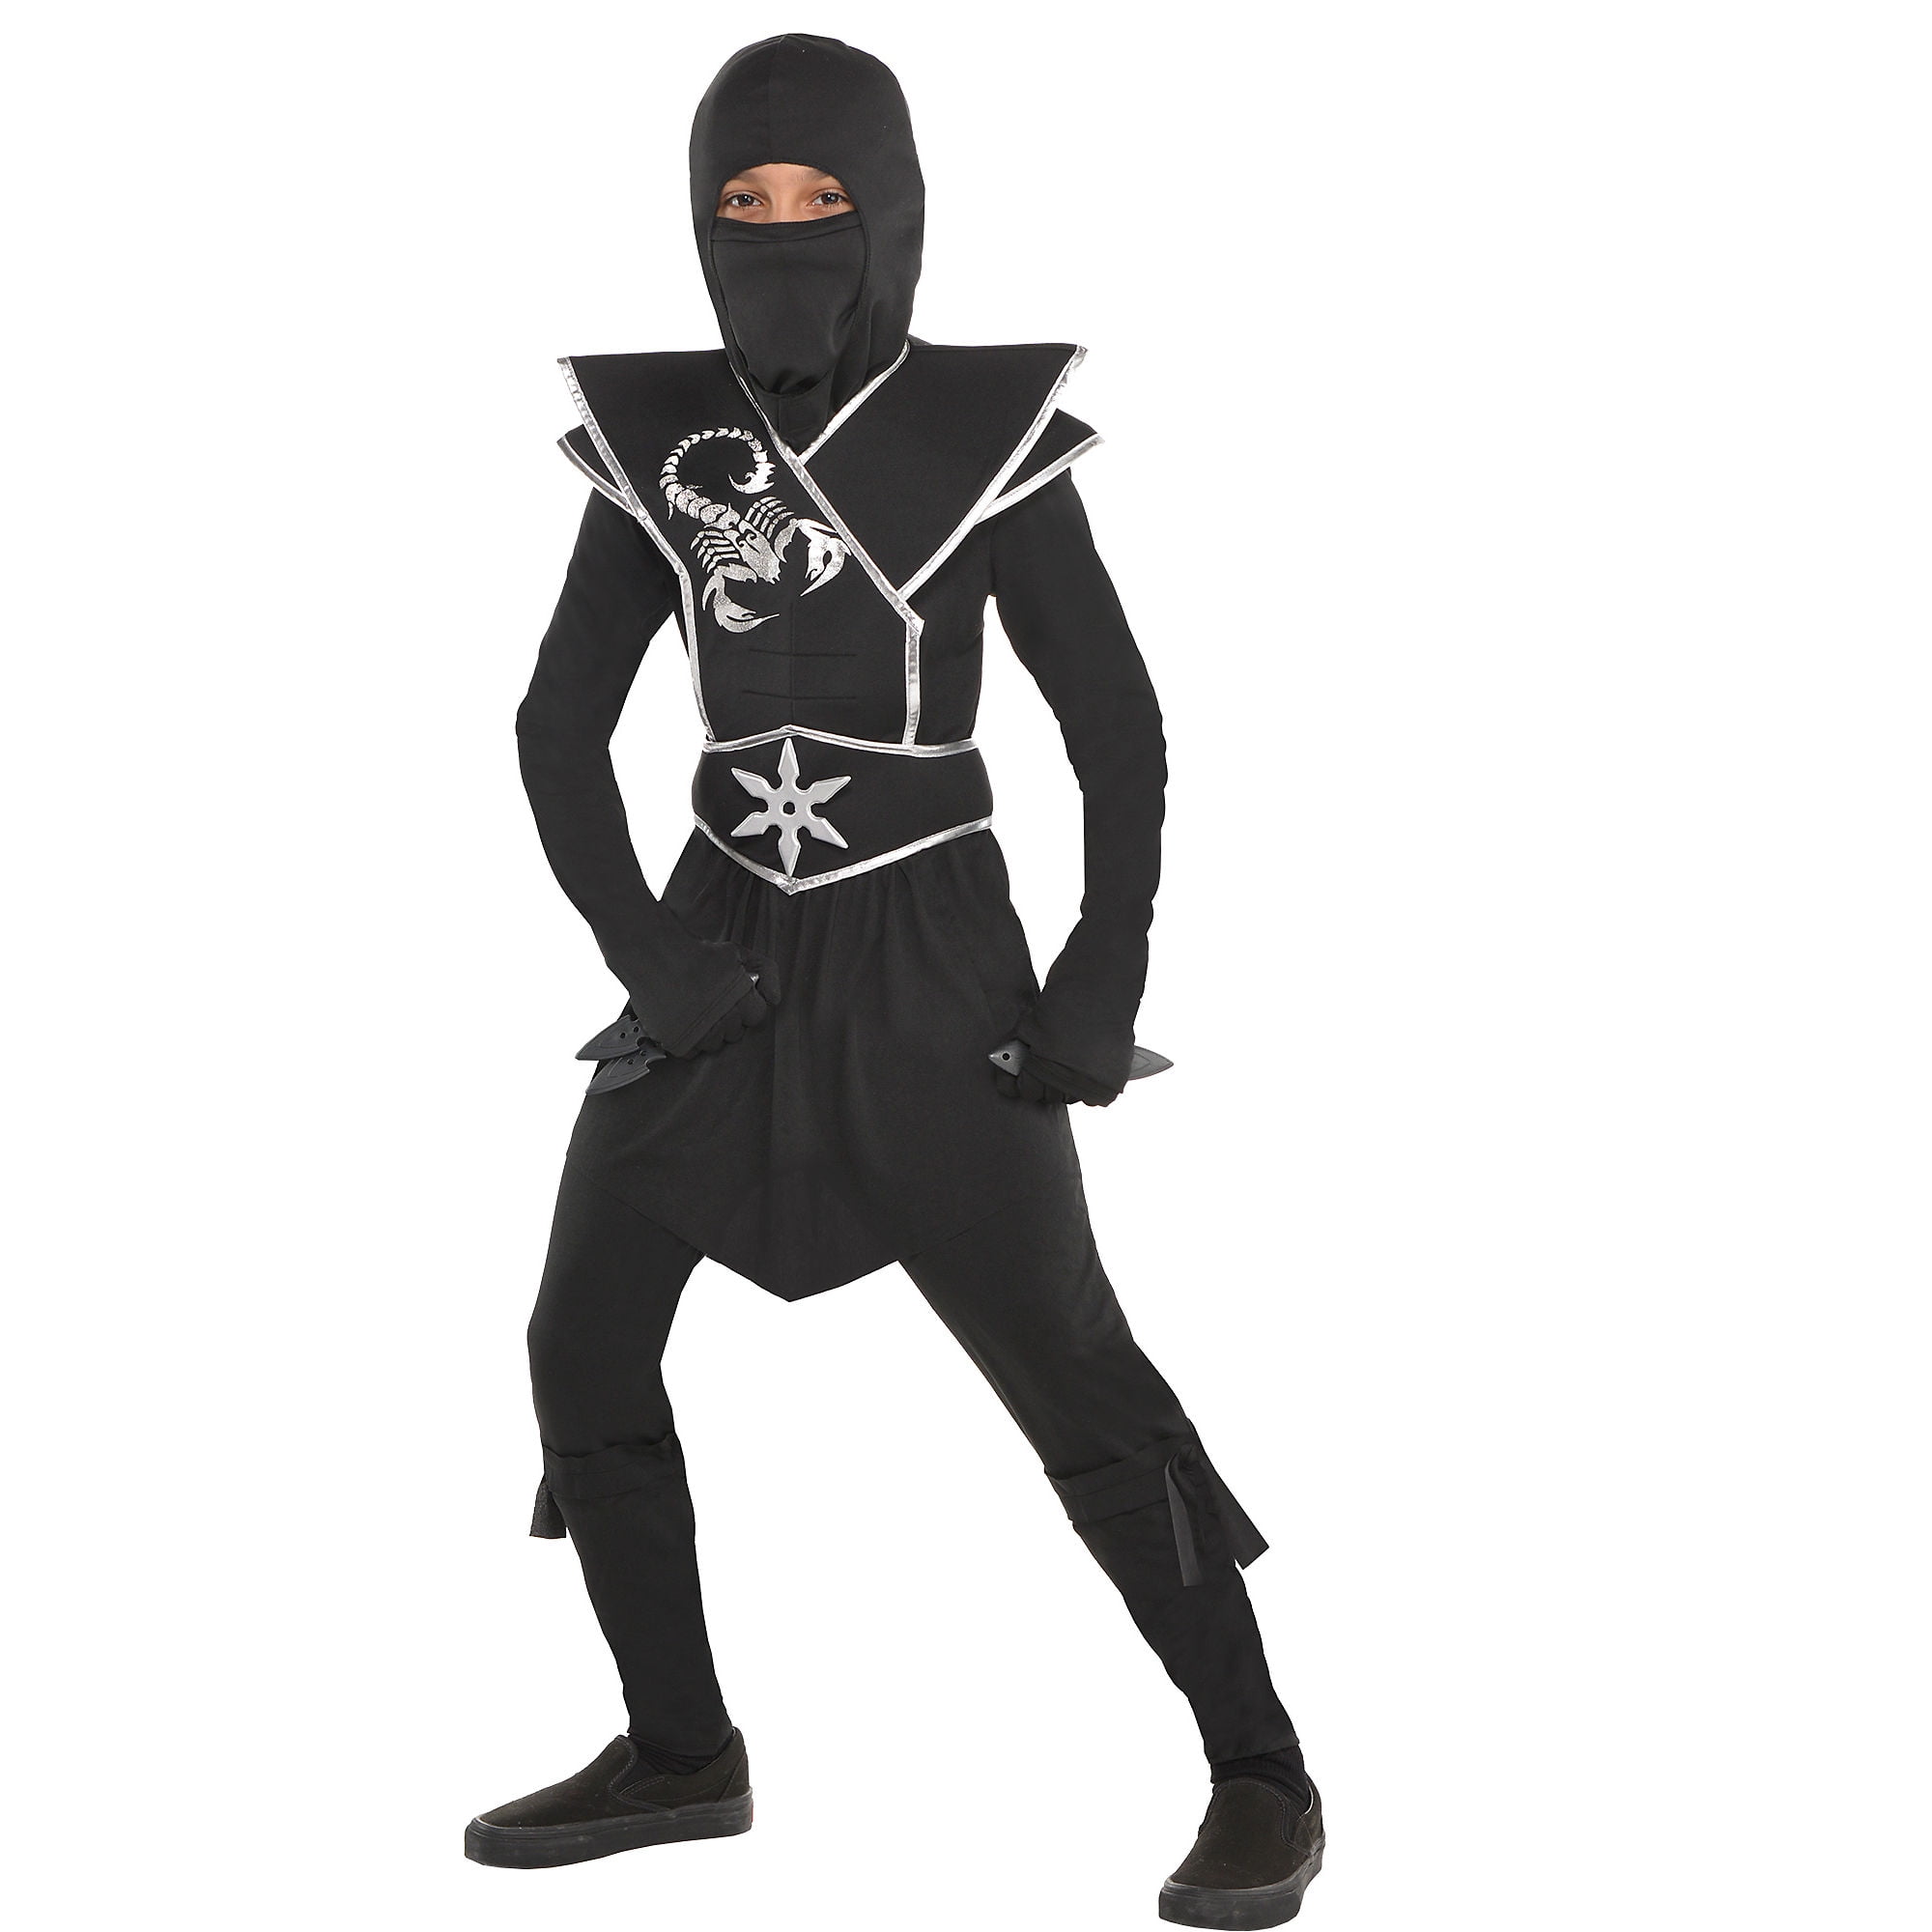 Suit Yourself Black Ops Ninja Costume for Boys, Size Small